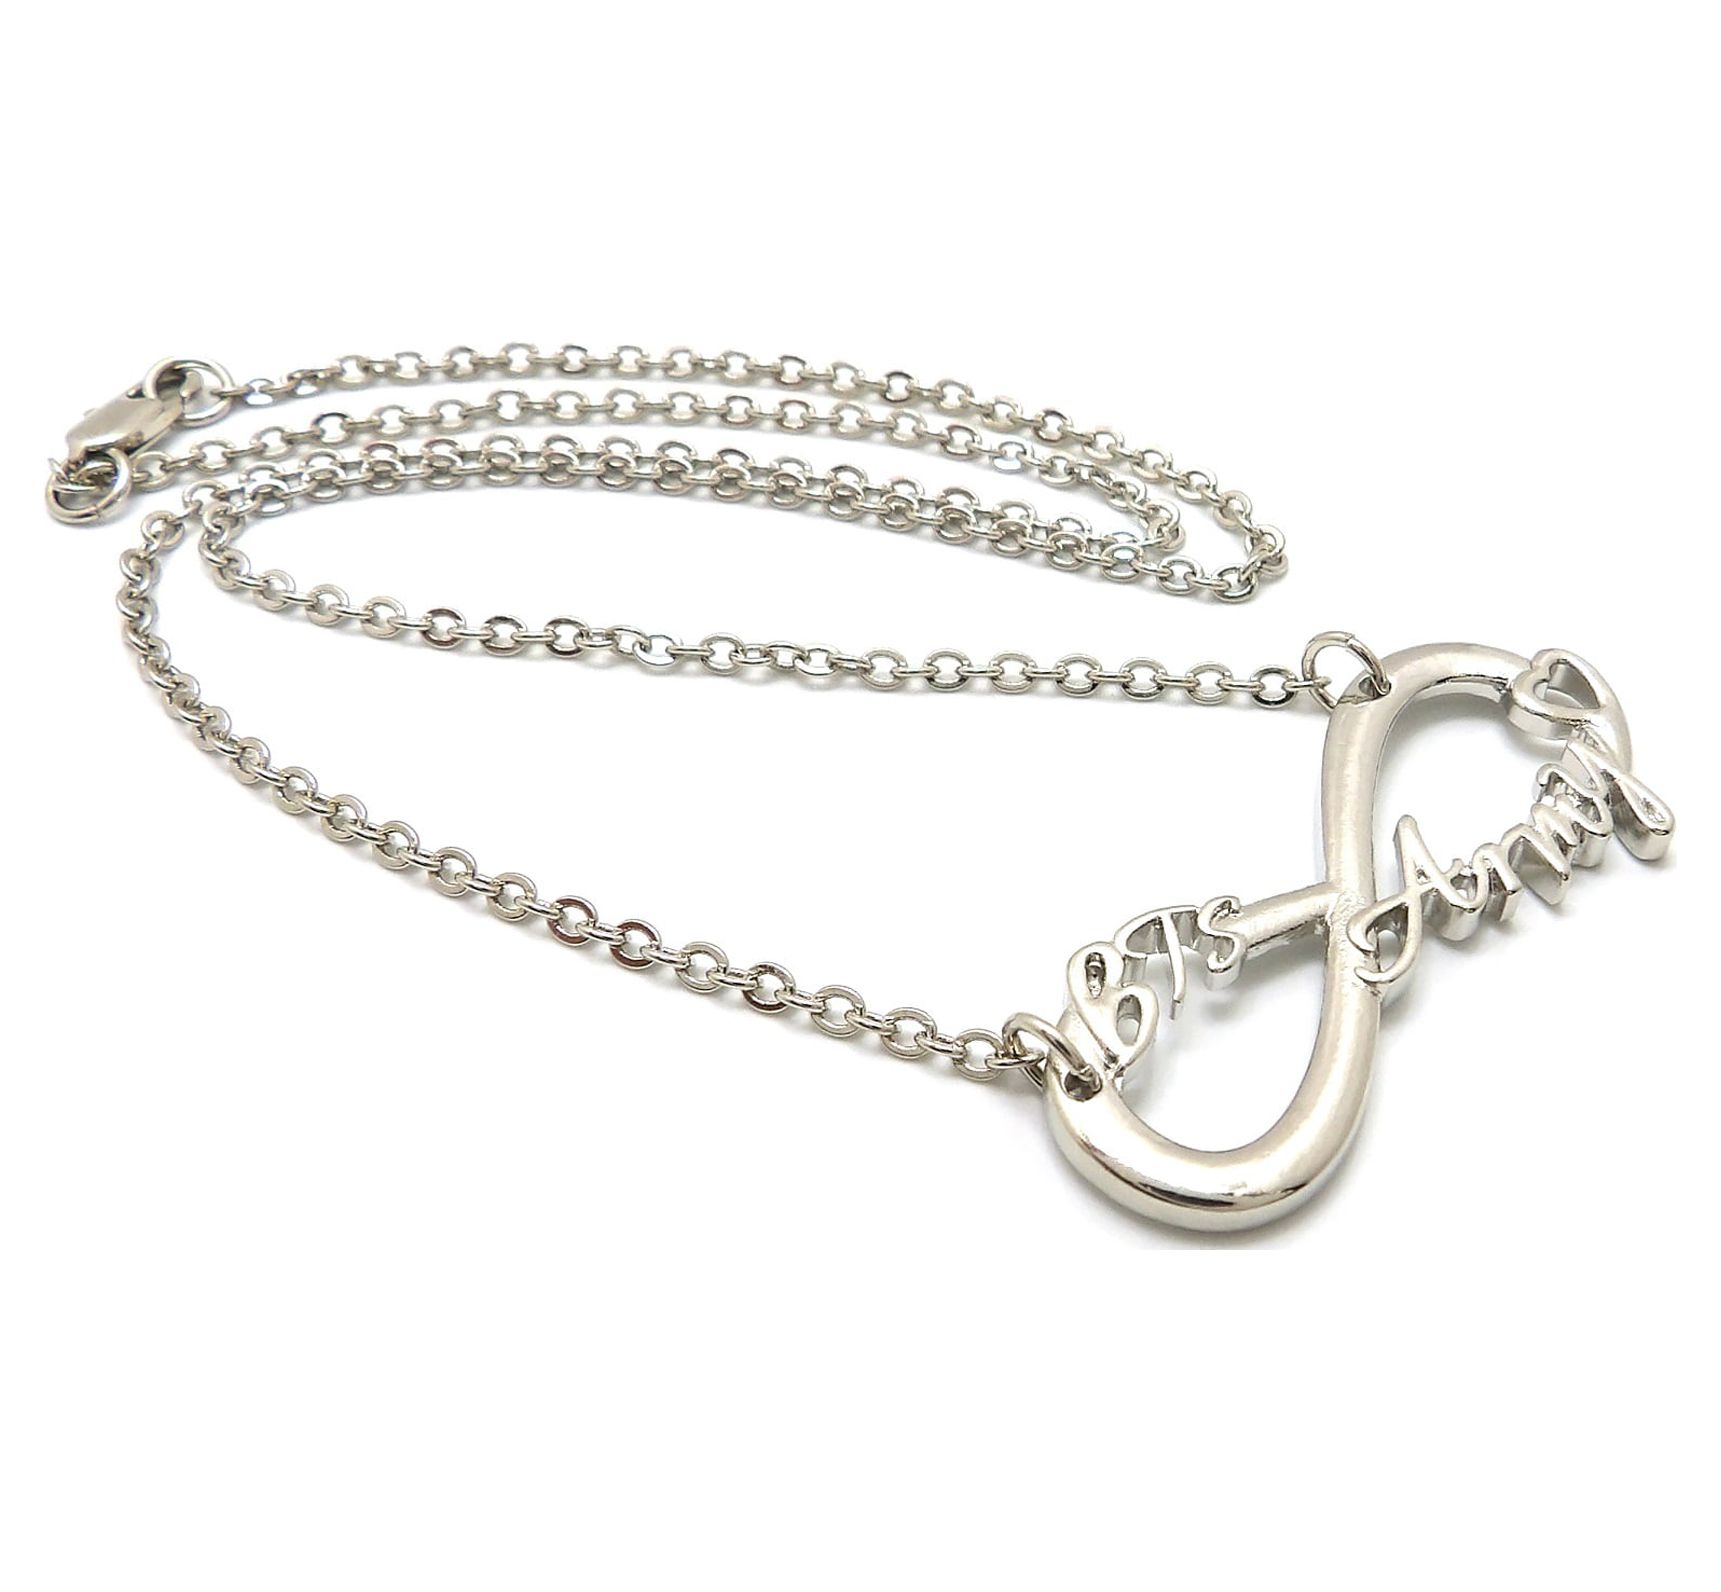 BTS Army Fans Infinity Sign Pendant with 2mm 18" Link Chain Necklace in Silver-Tone, BTS Army - image 4 of 4